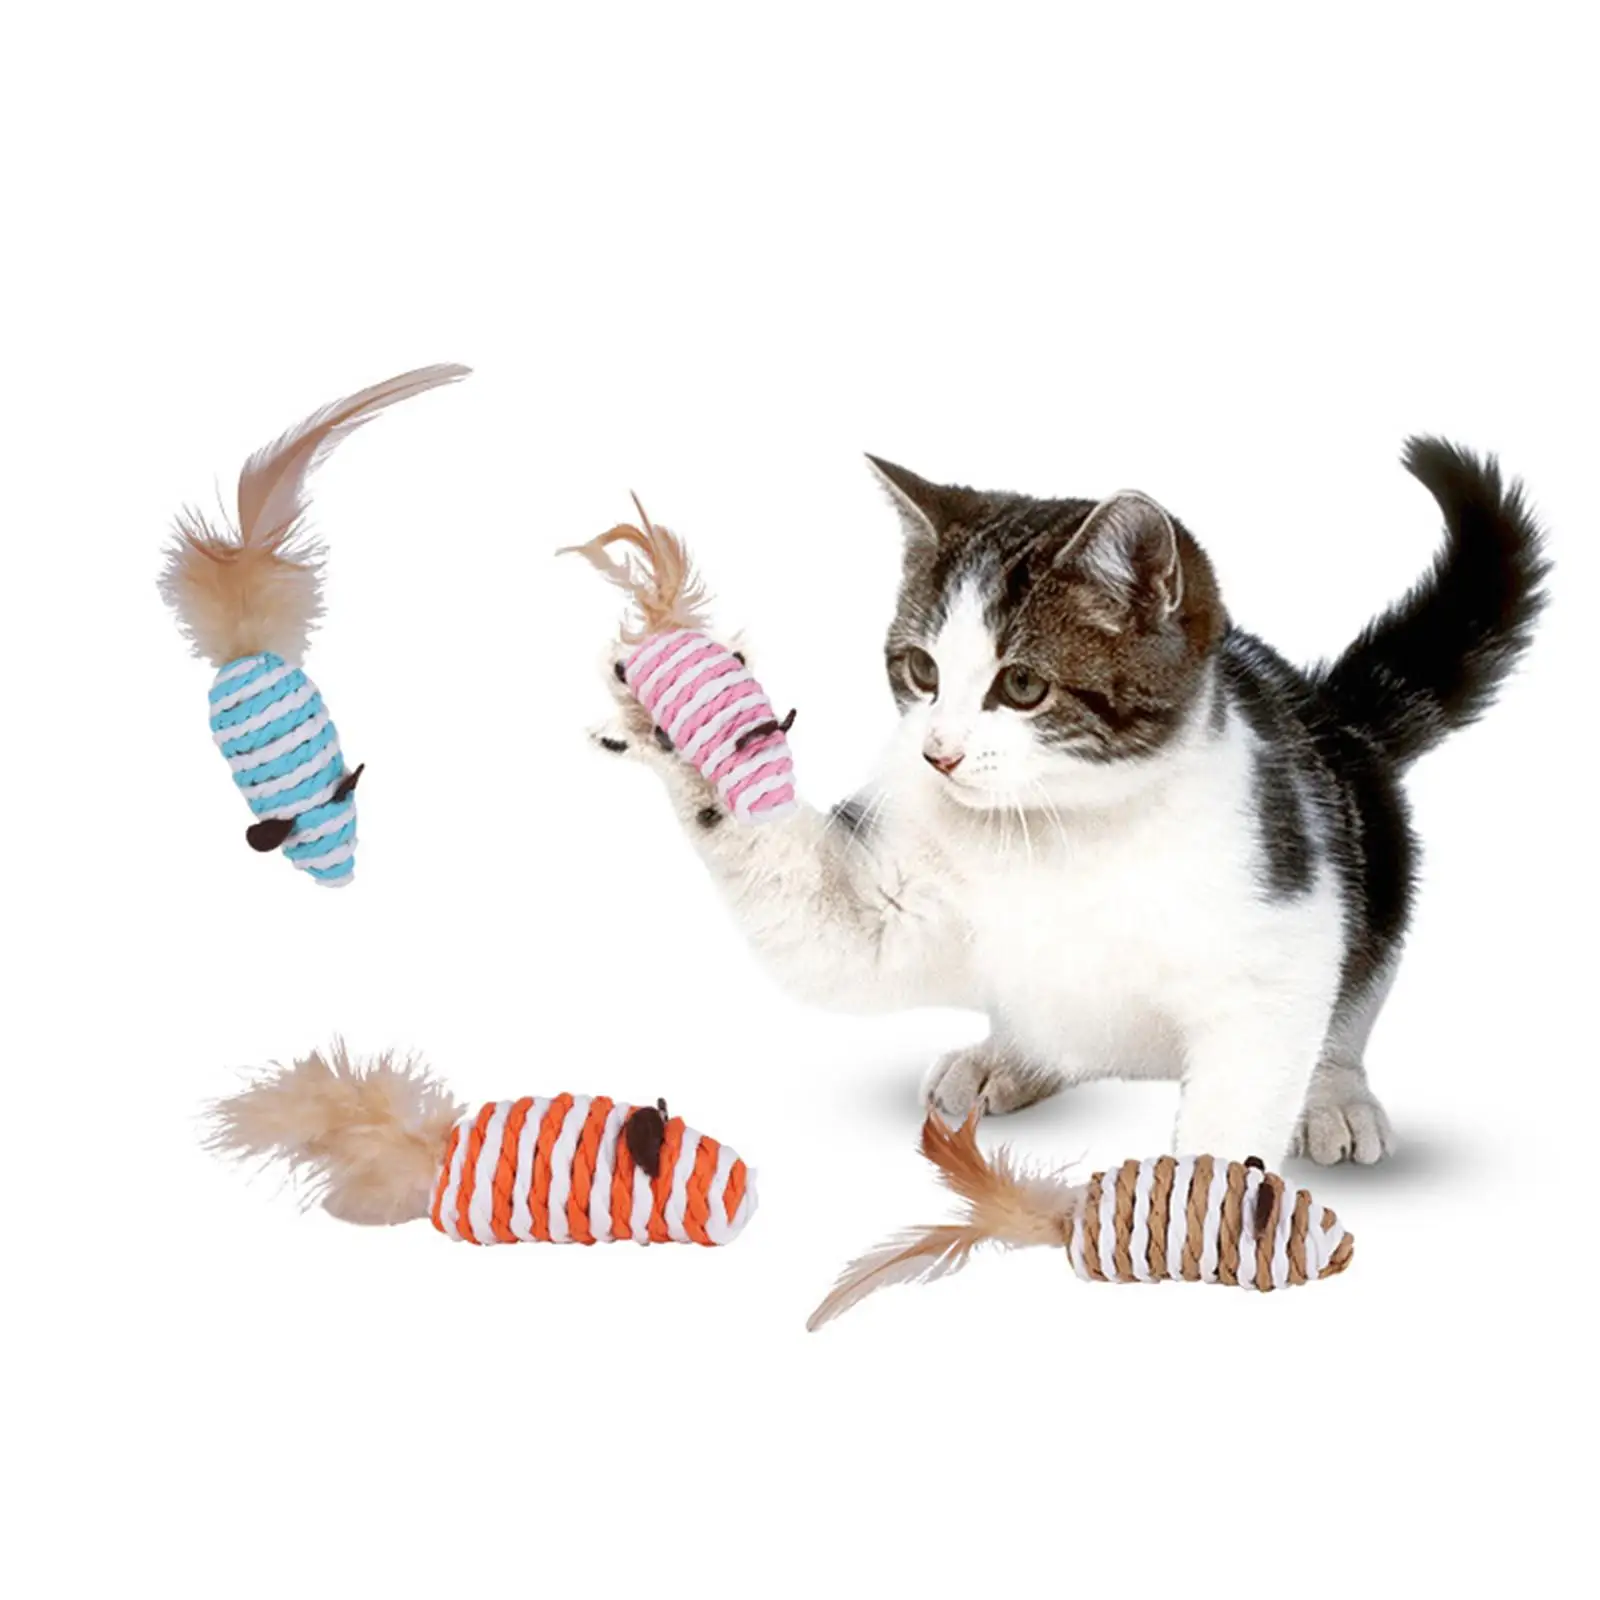 Woven False Mice Cat Toys Little Mice Size Paper Rope Small Durable Pets Toys for Interactive Play Fetch Pets Training Kitten